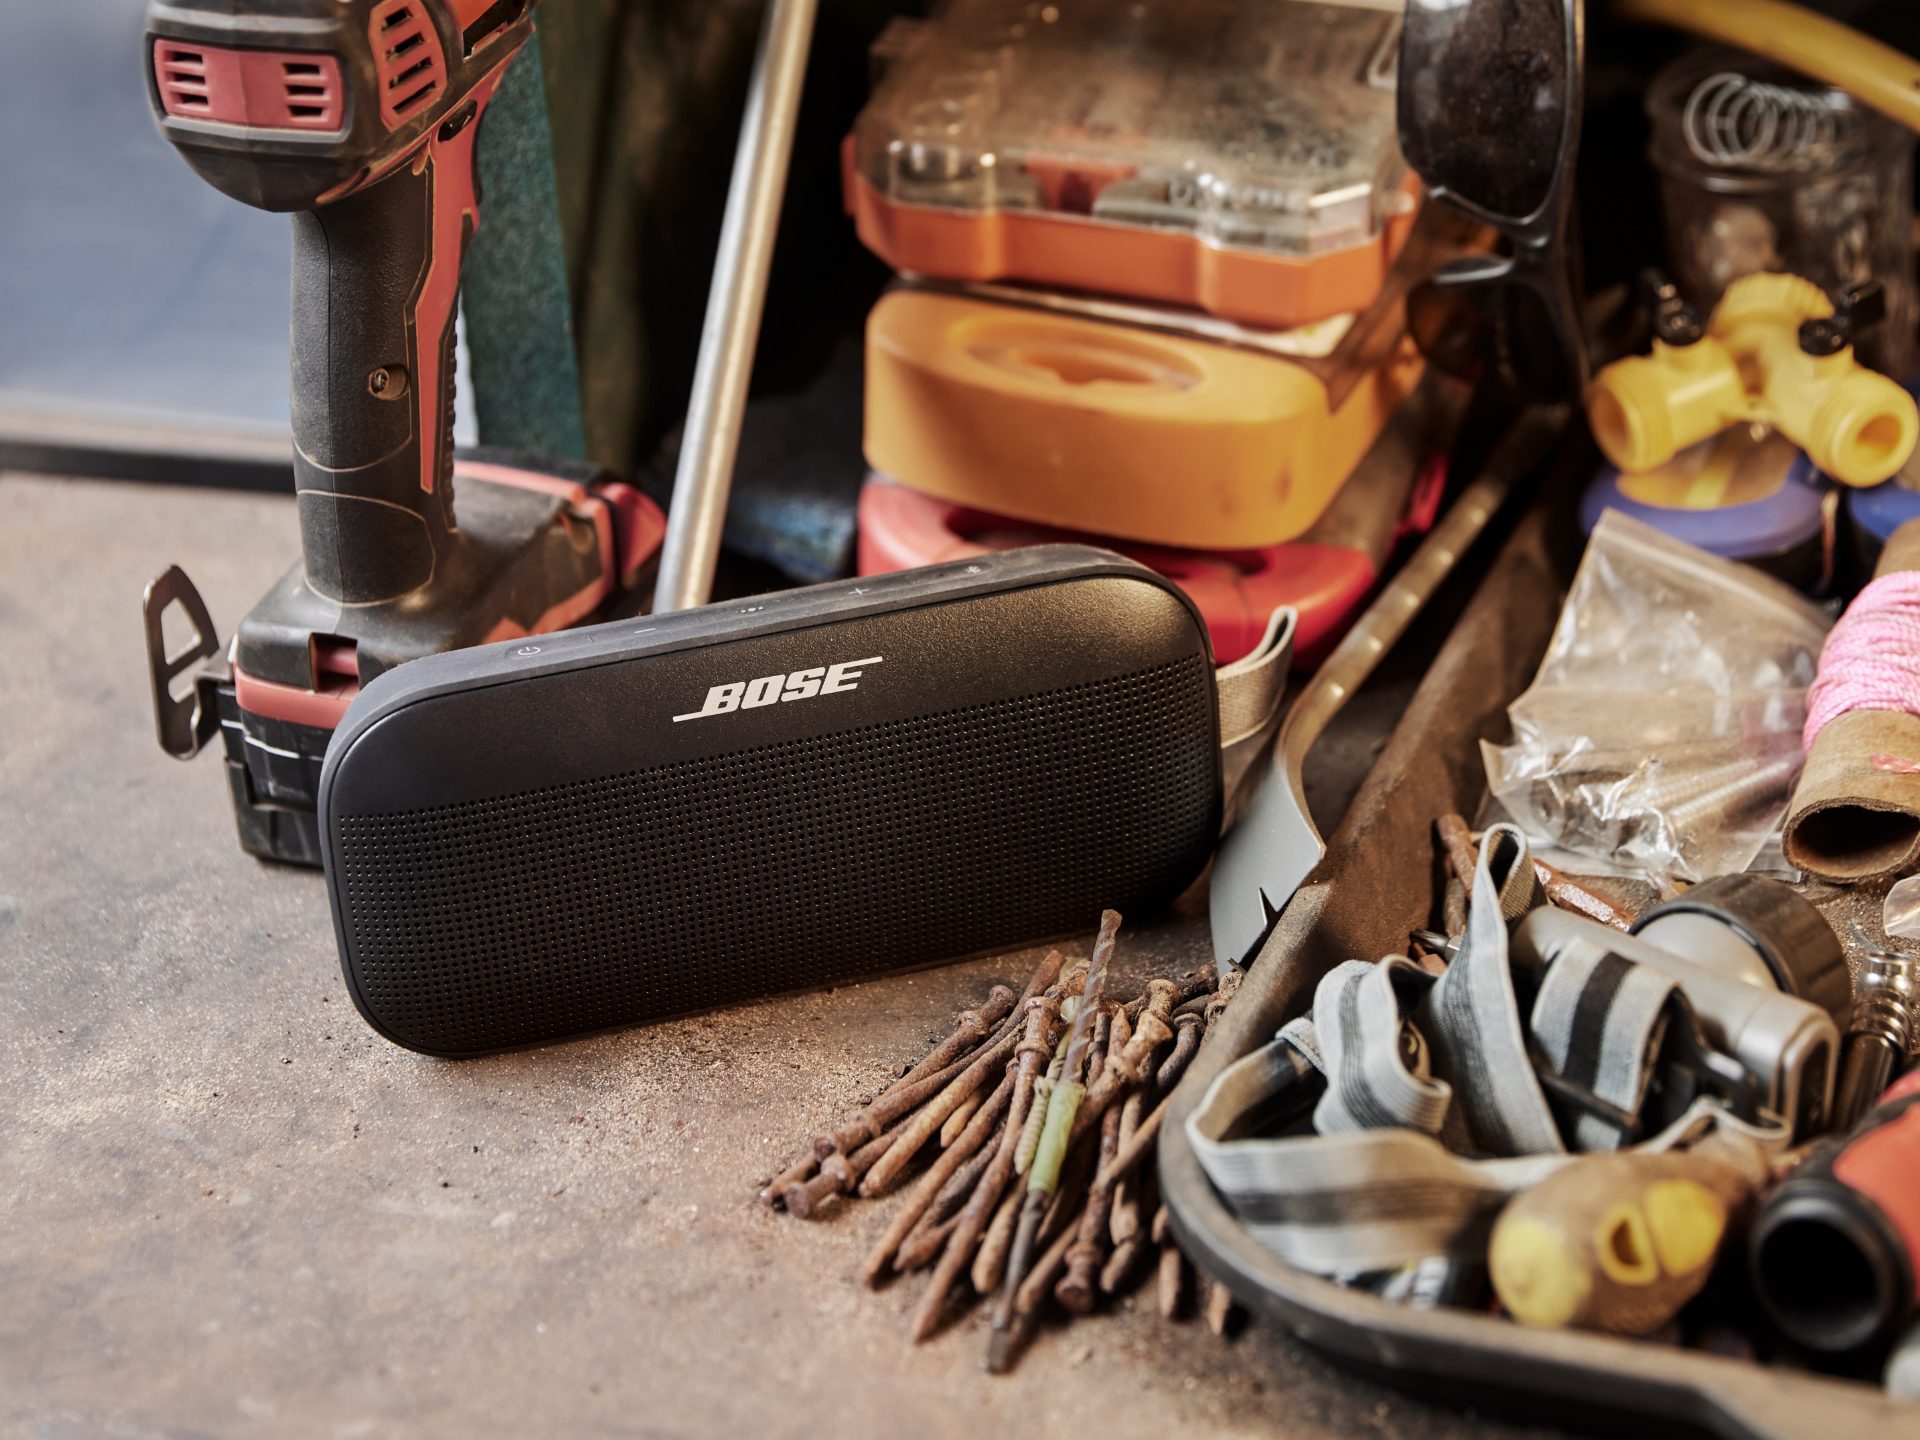 Bose Soundlink Flex on Amazon: Wireless speaker with IP67 protection and up to 12 hours of battery life at a $20 discount